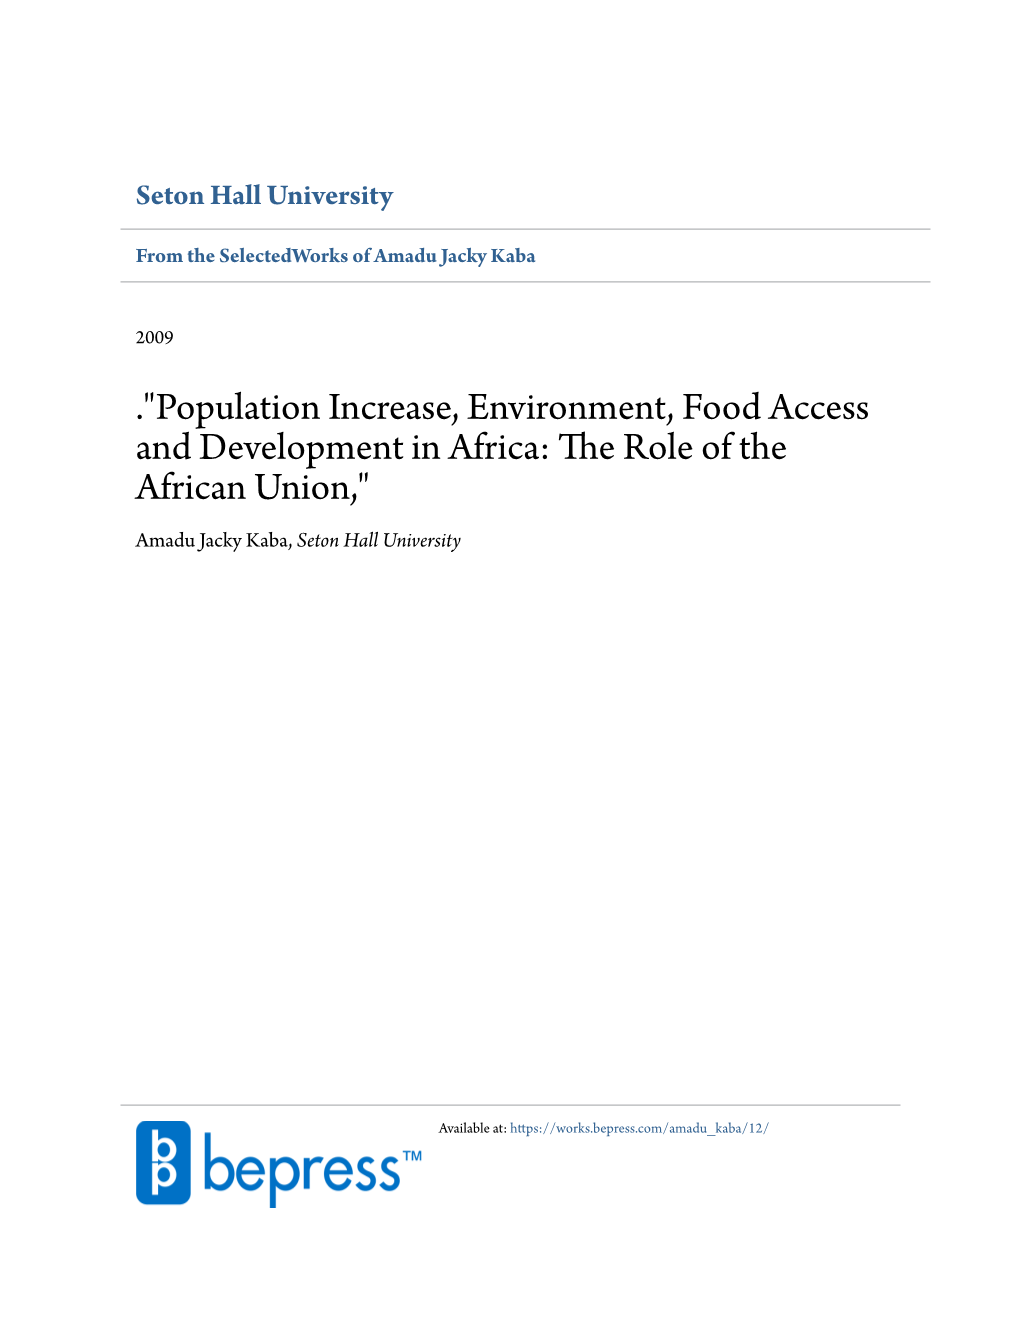 Population Increase, Environment, Food Access and Development in Africa: the Role of the African Union," Amadu Jacky Kaba, Seton Hall University